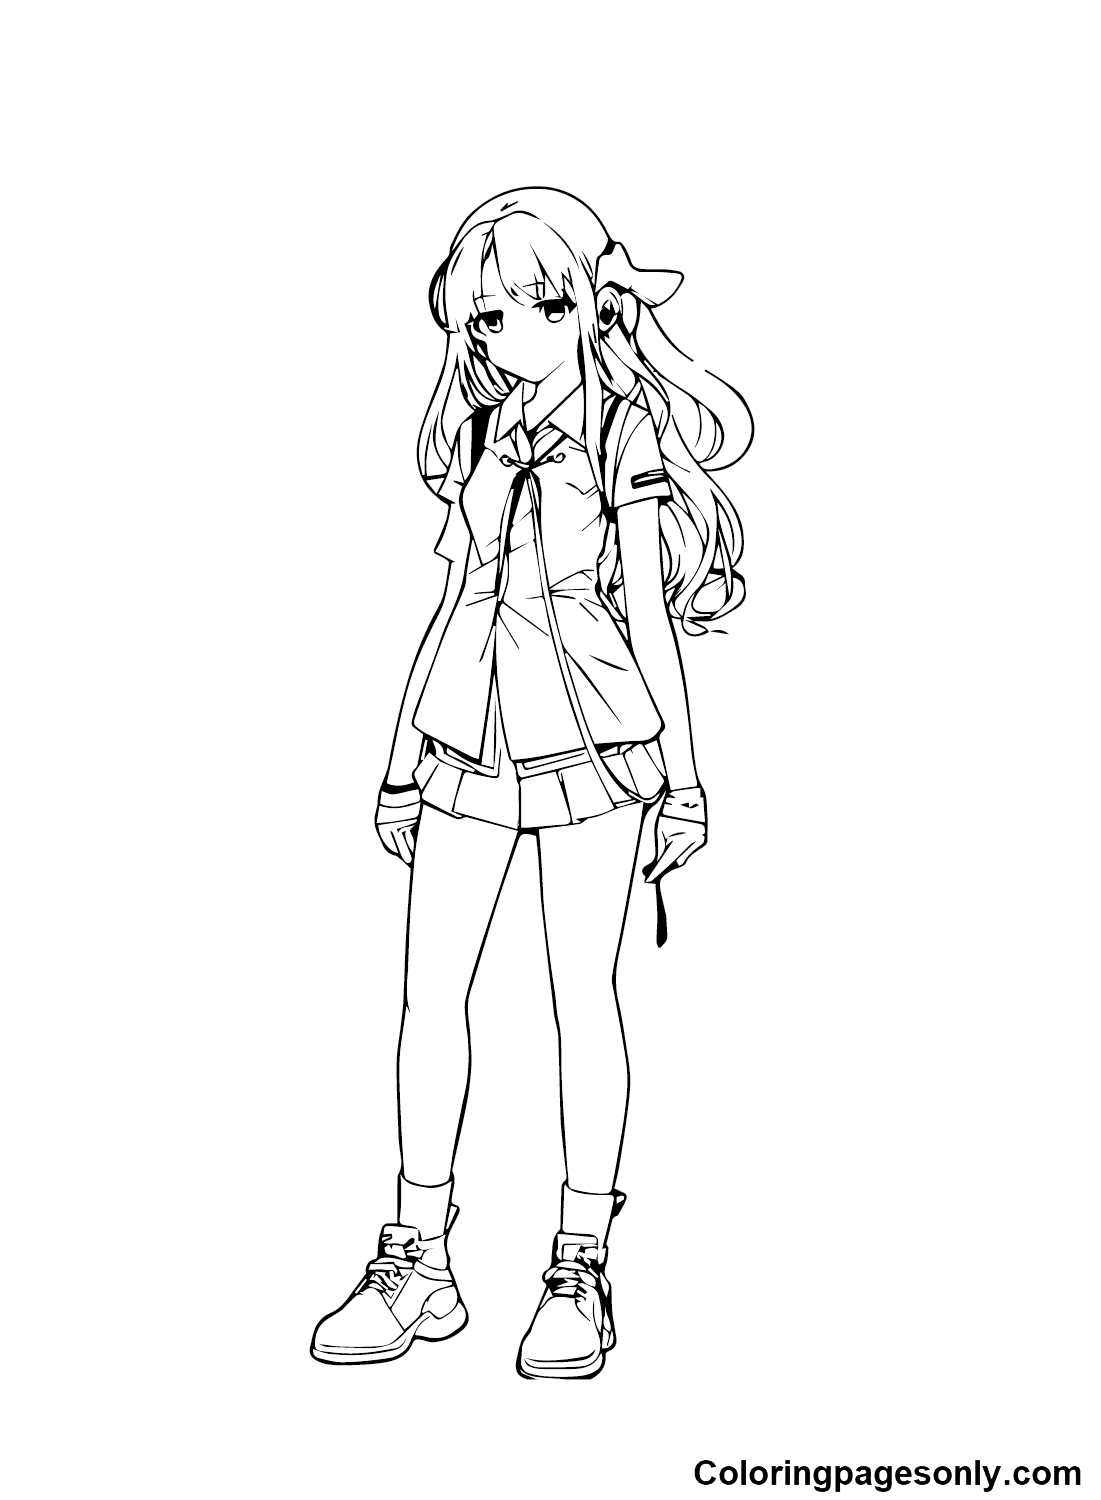 Free Anime Girl Coloring Page